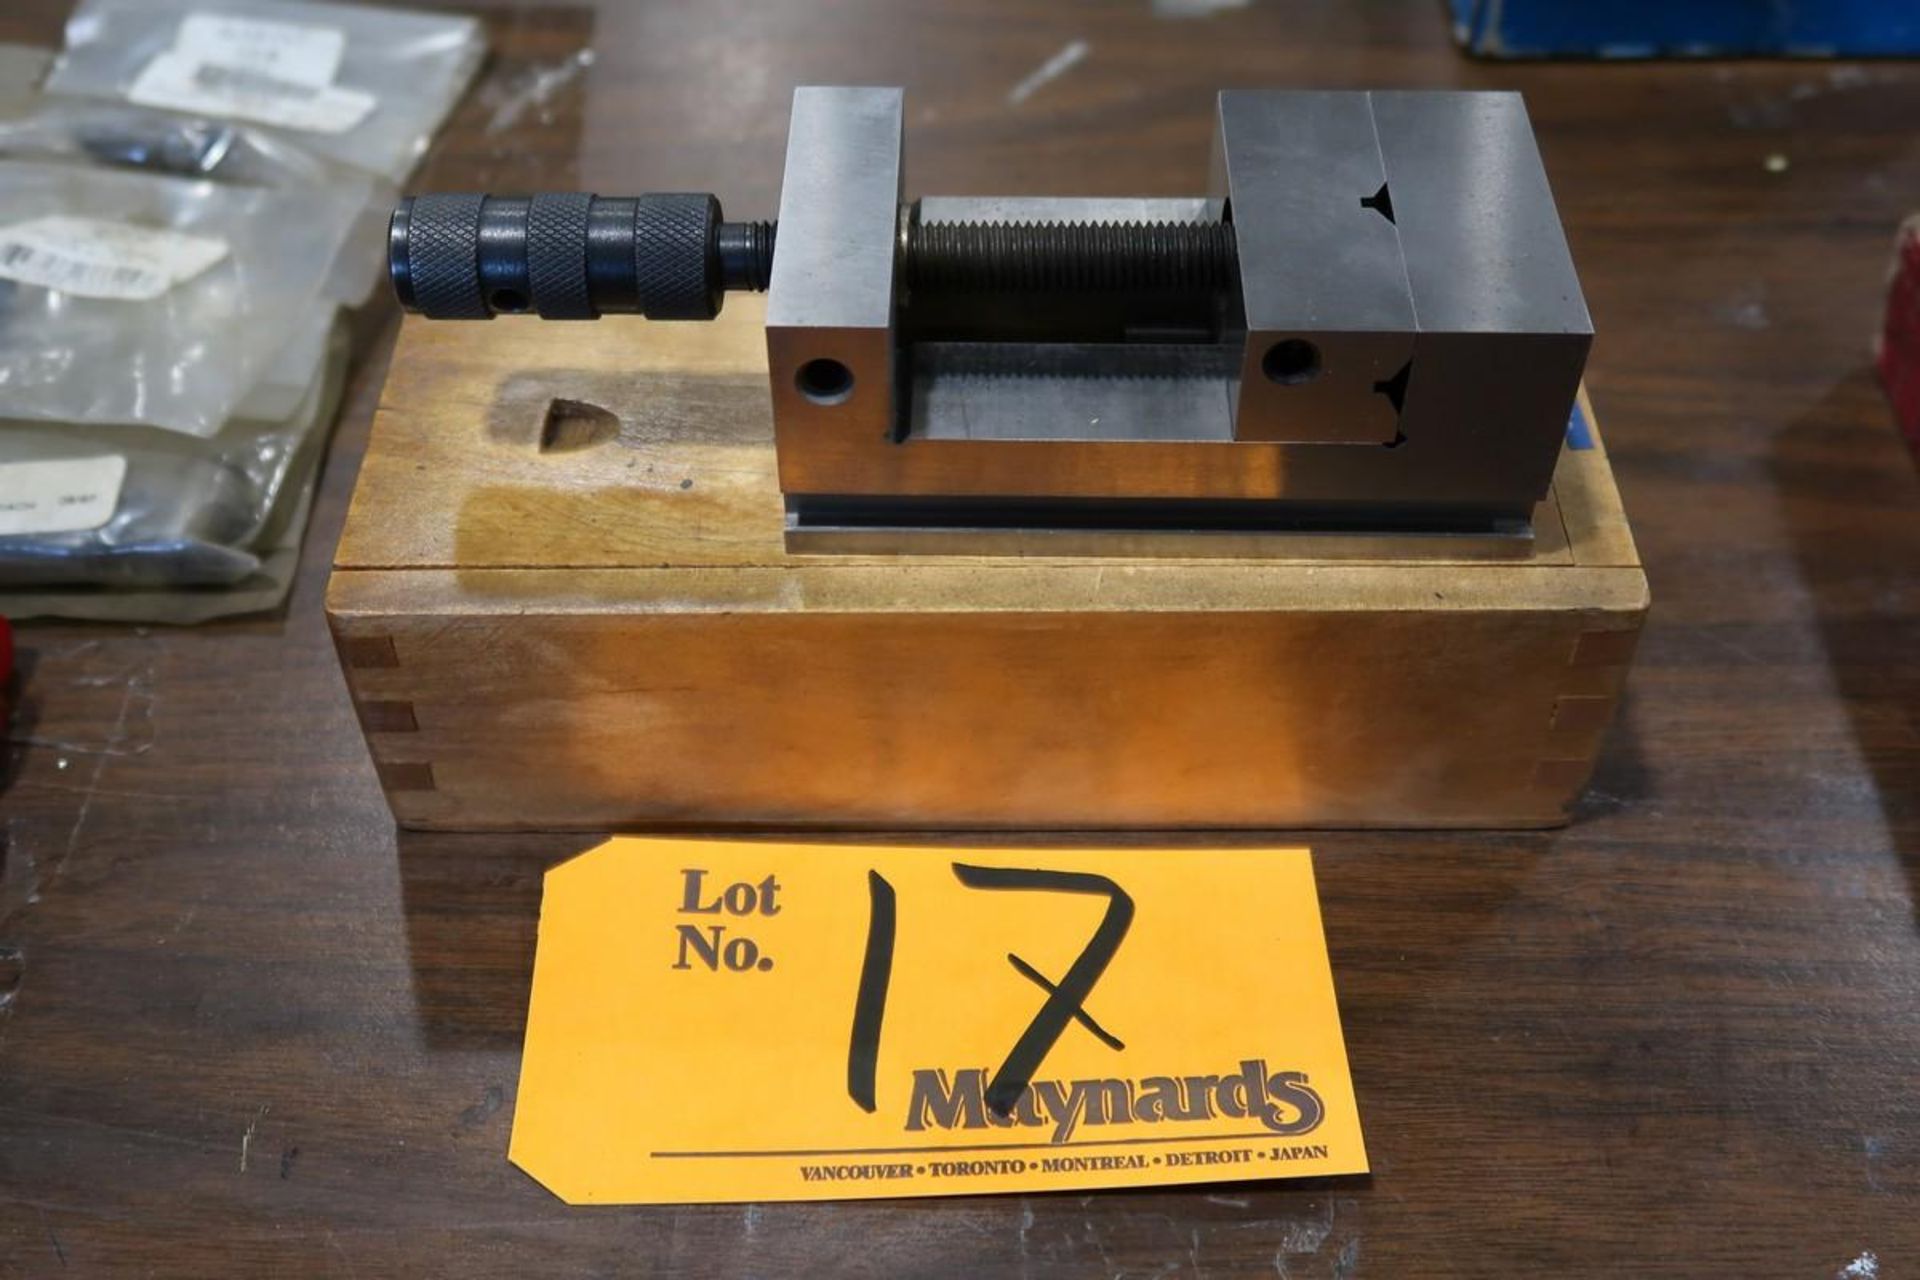 2-1/2" Tool Makers Vise